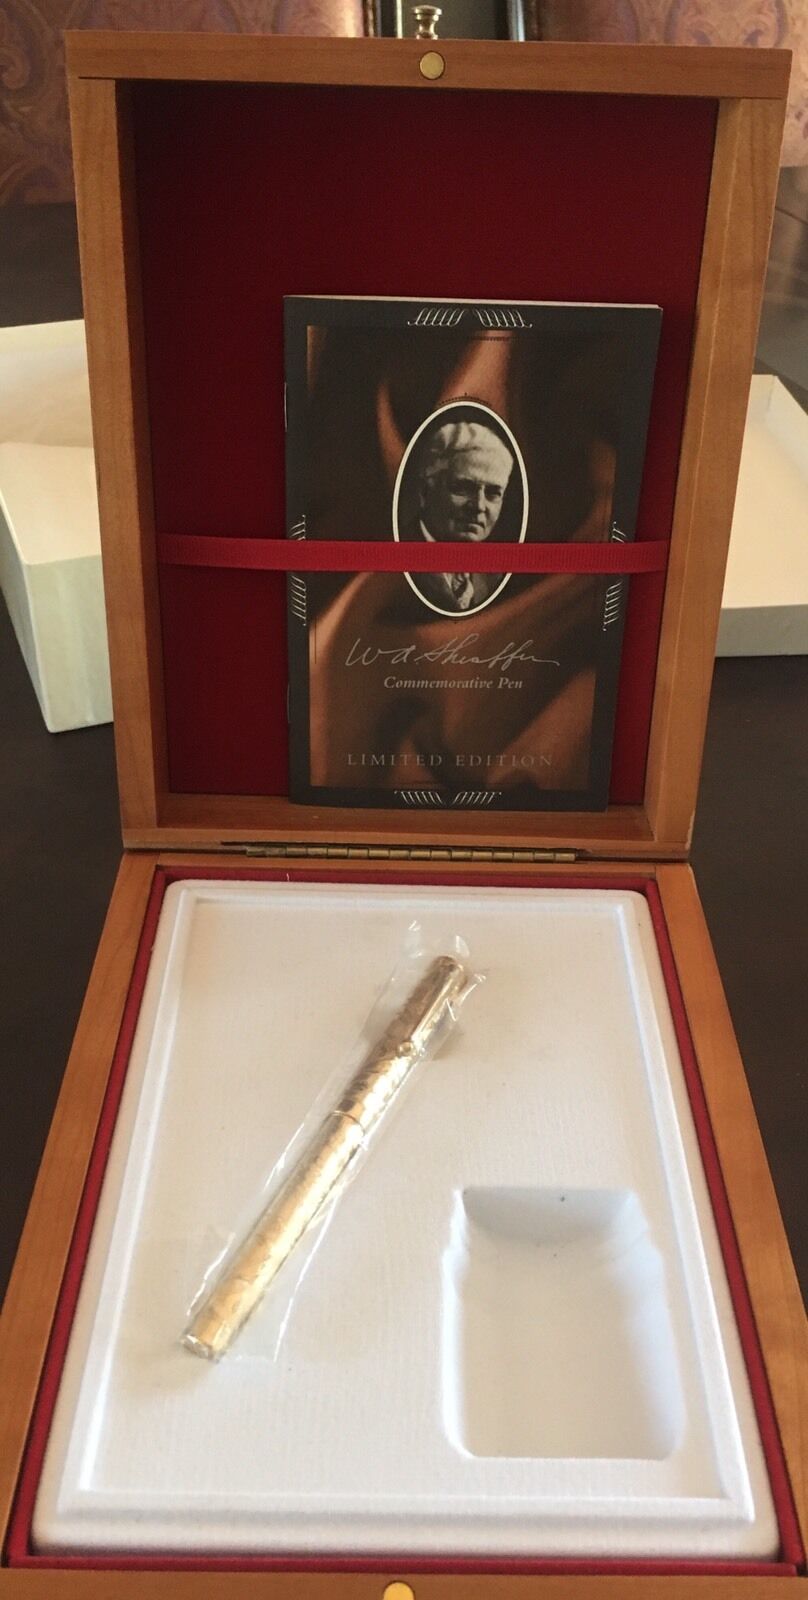 W. A. Sheaffer Commemorative Foutain Pen; Limited Edition #2282 of 6000